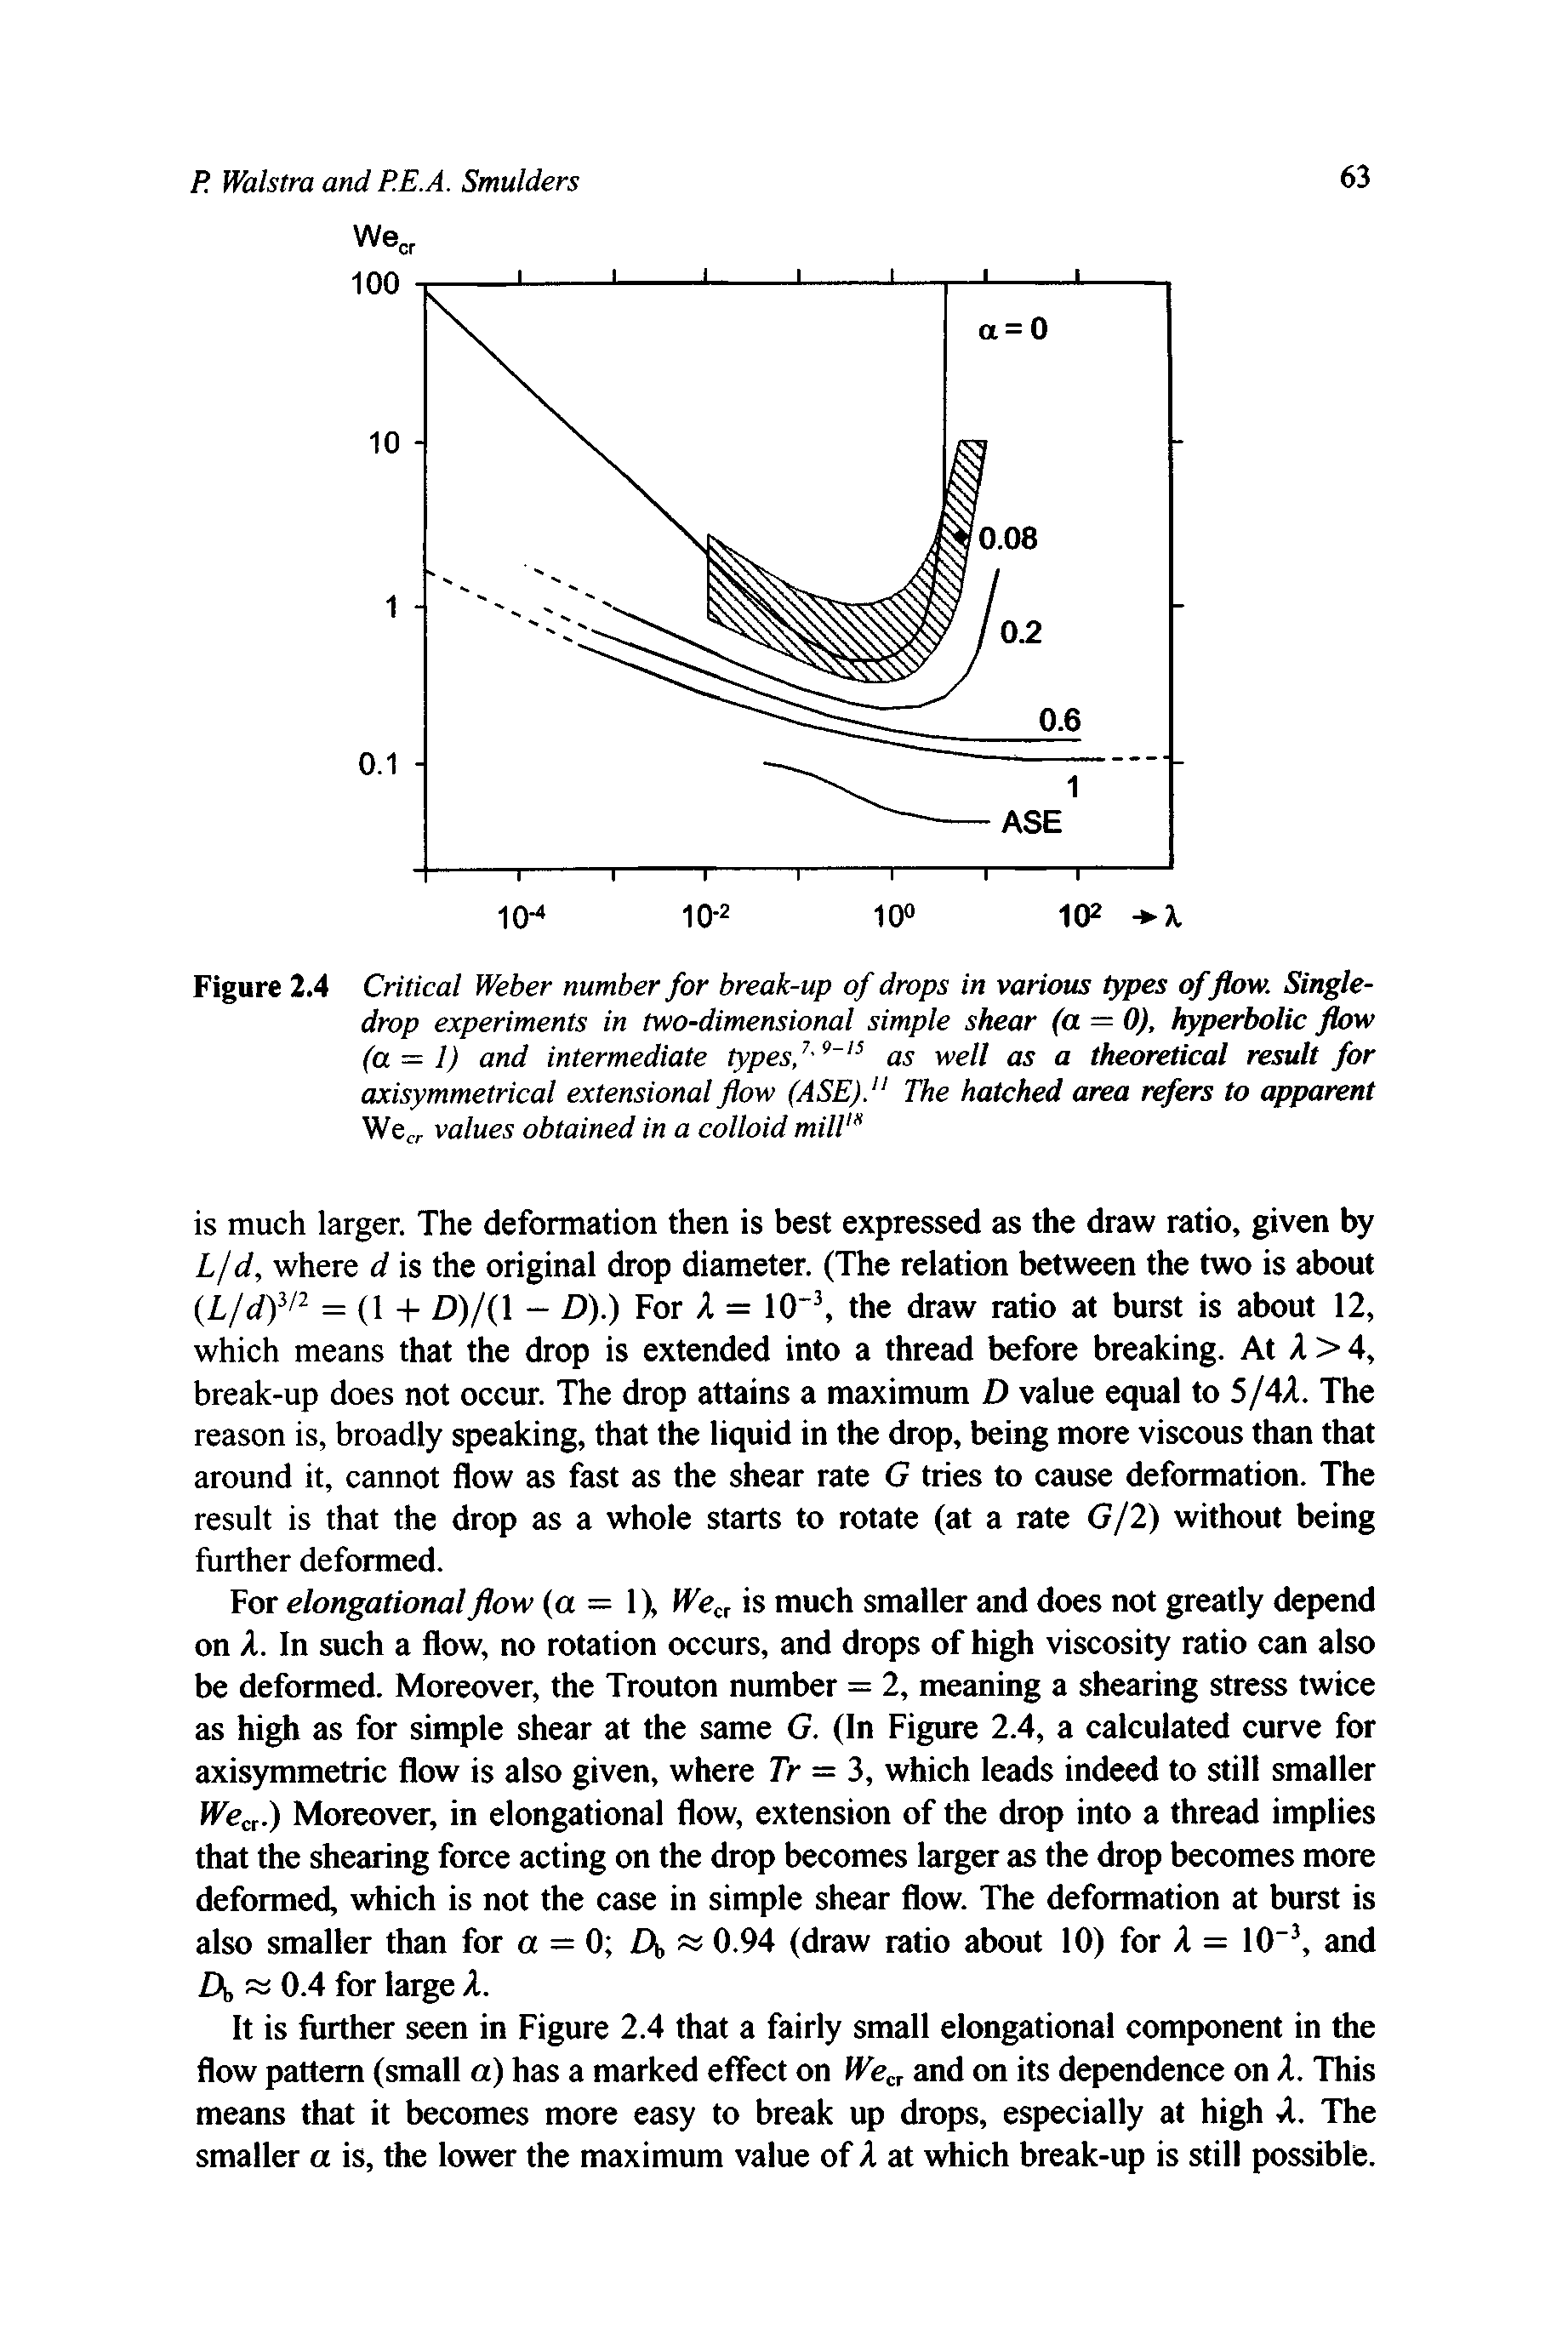 Figure 2.4 Critical Weber number for break-up of drops in various types of flow. Singledrop experiments in two-dimensional simple shear (a — 0), hyperbolic flow (a = l) and intermediate types/-as well as a theoretical result for axisymmetrical extensional flow (ASE)." The hatched area rrfers to apparent We values obtained in a colloid mill" ...